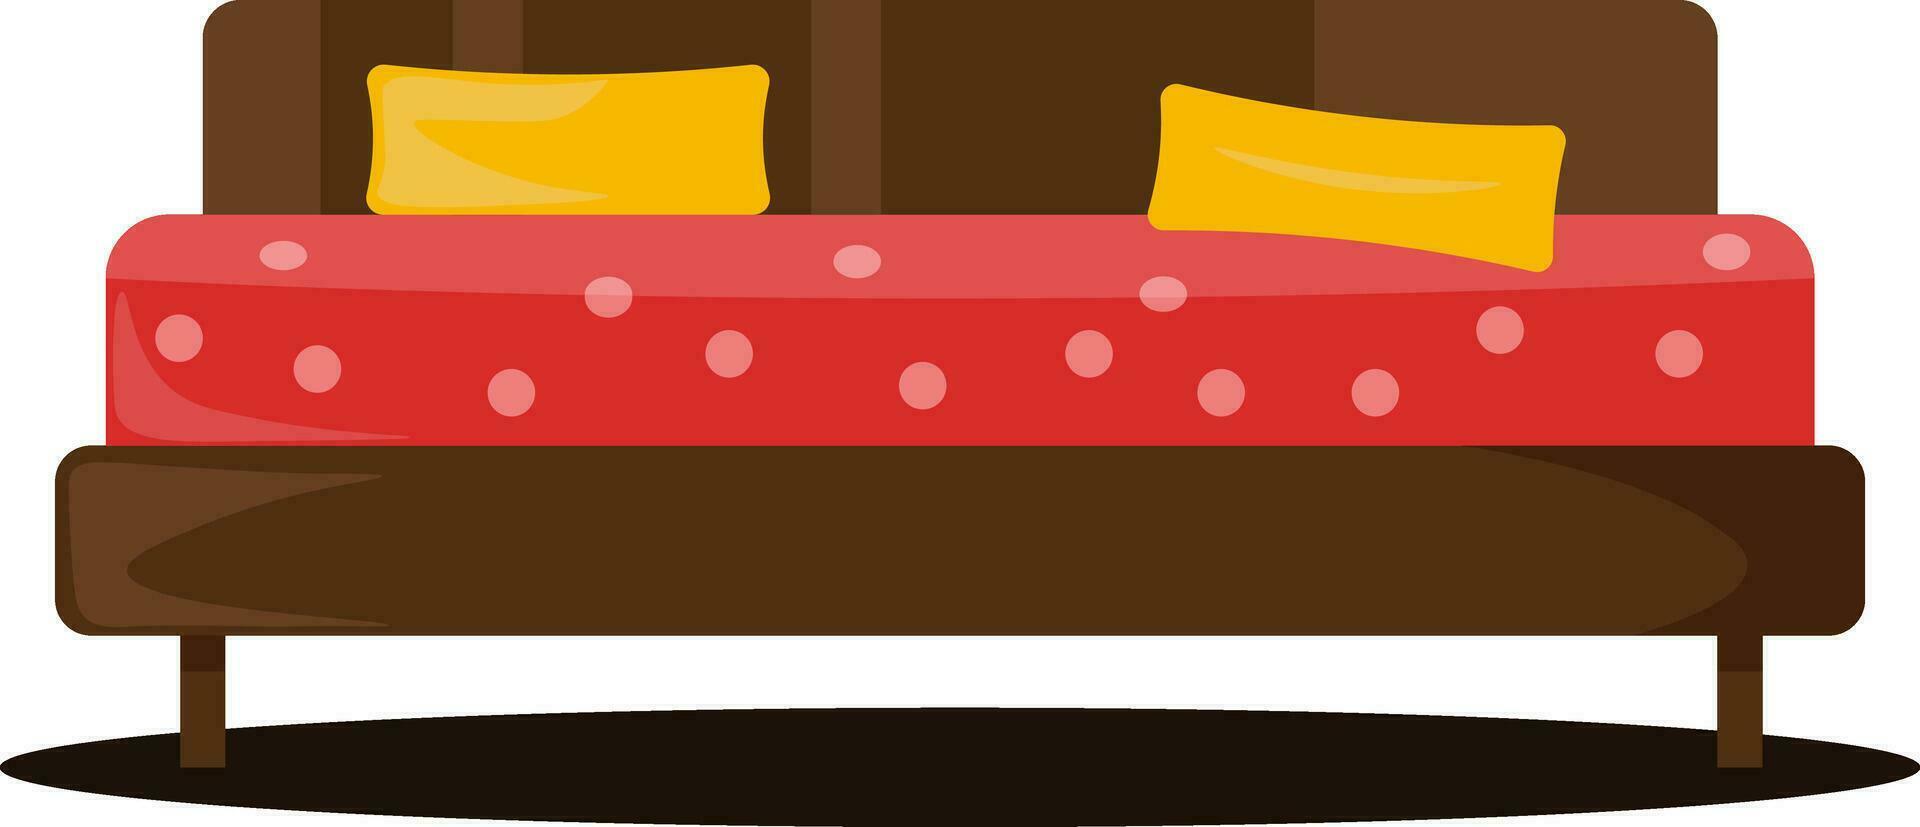 Big couch, illustration, vector on white background.